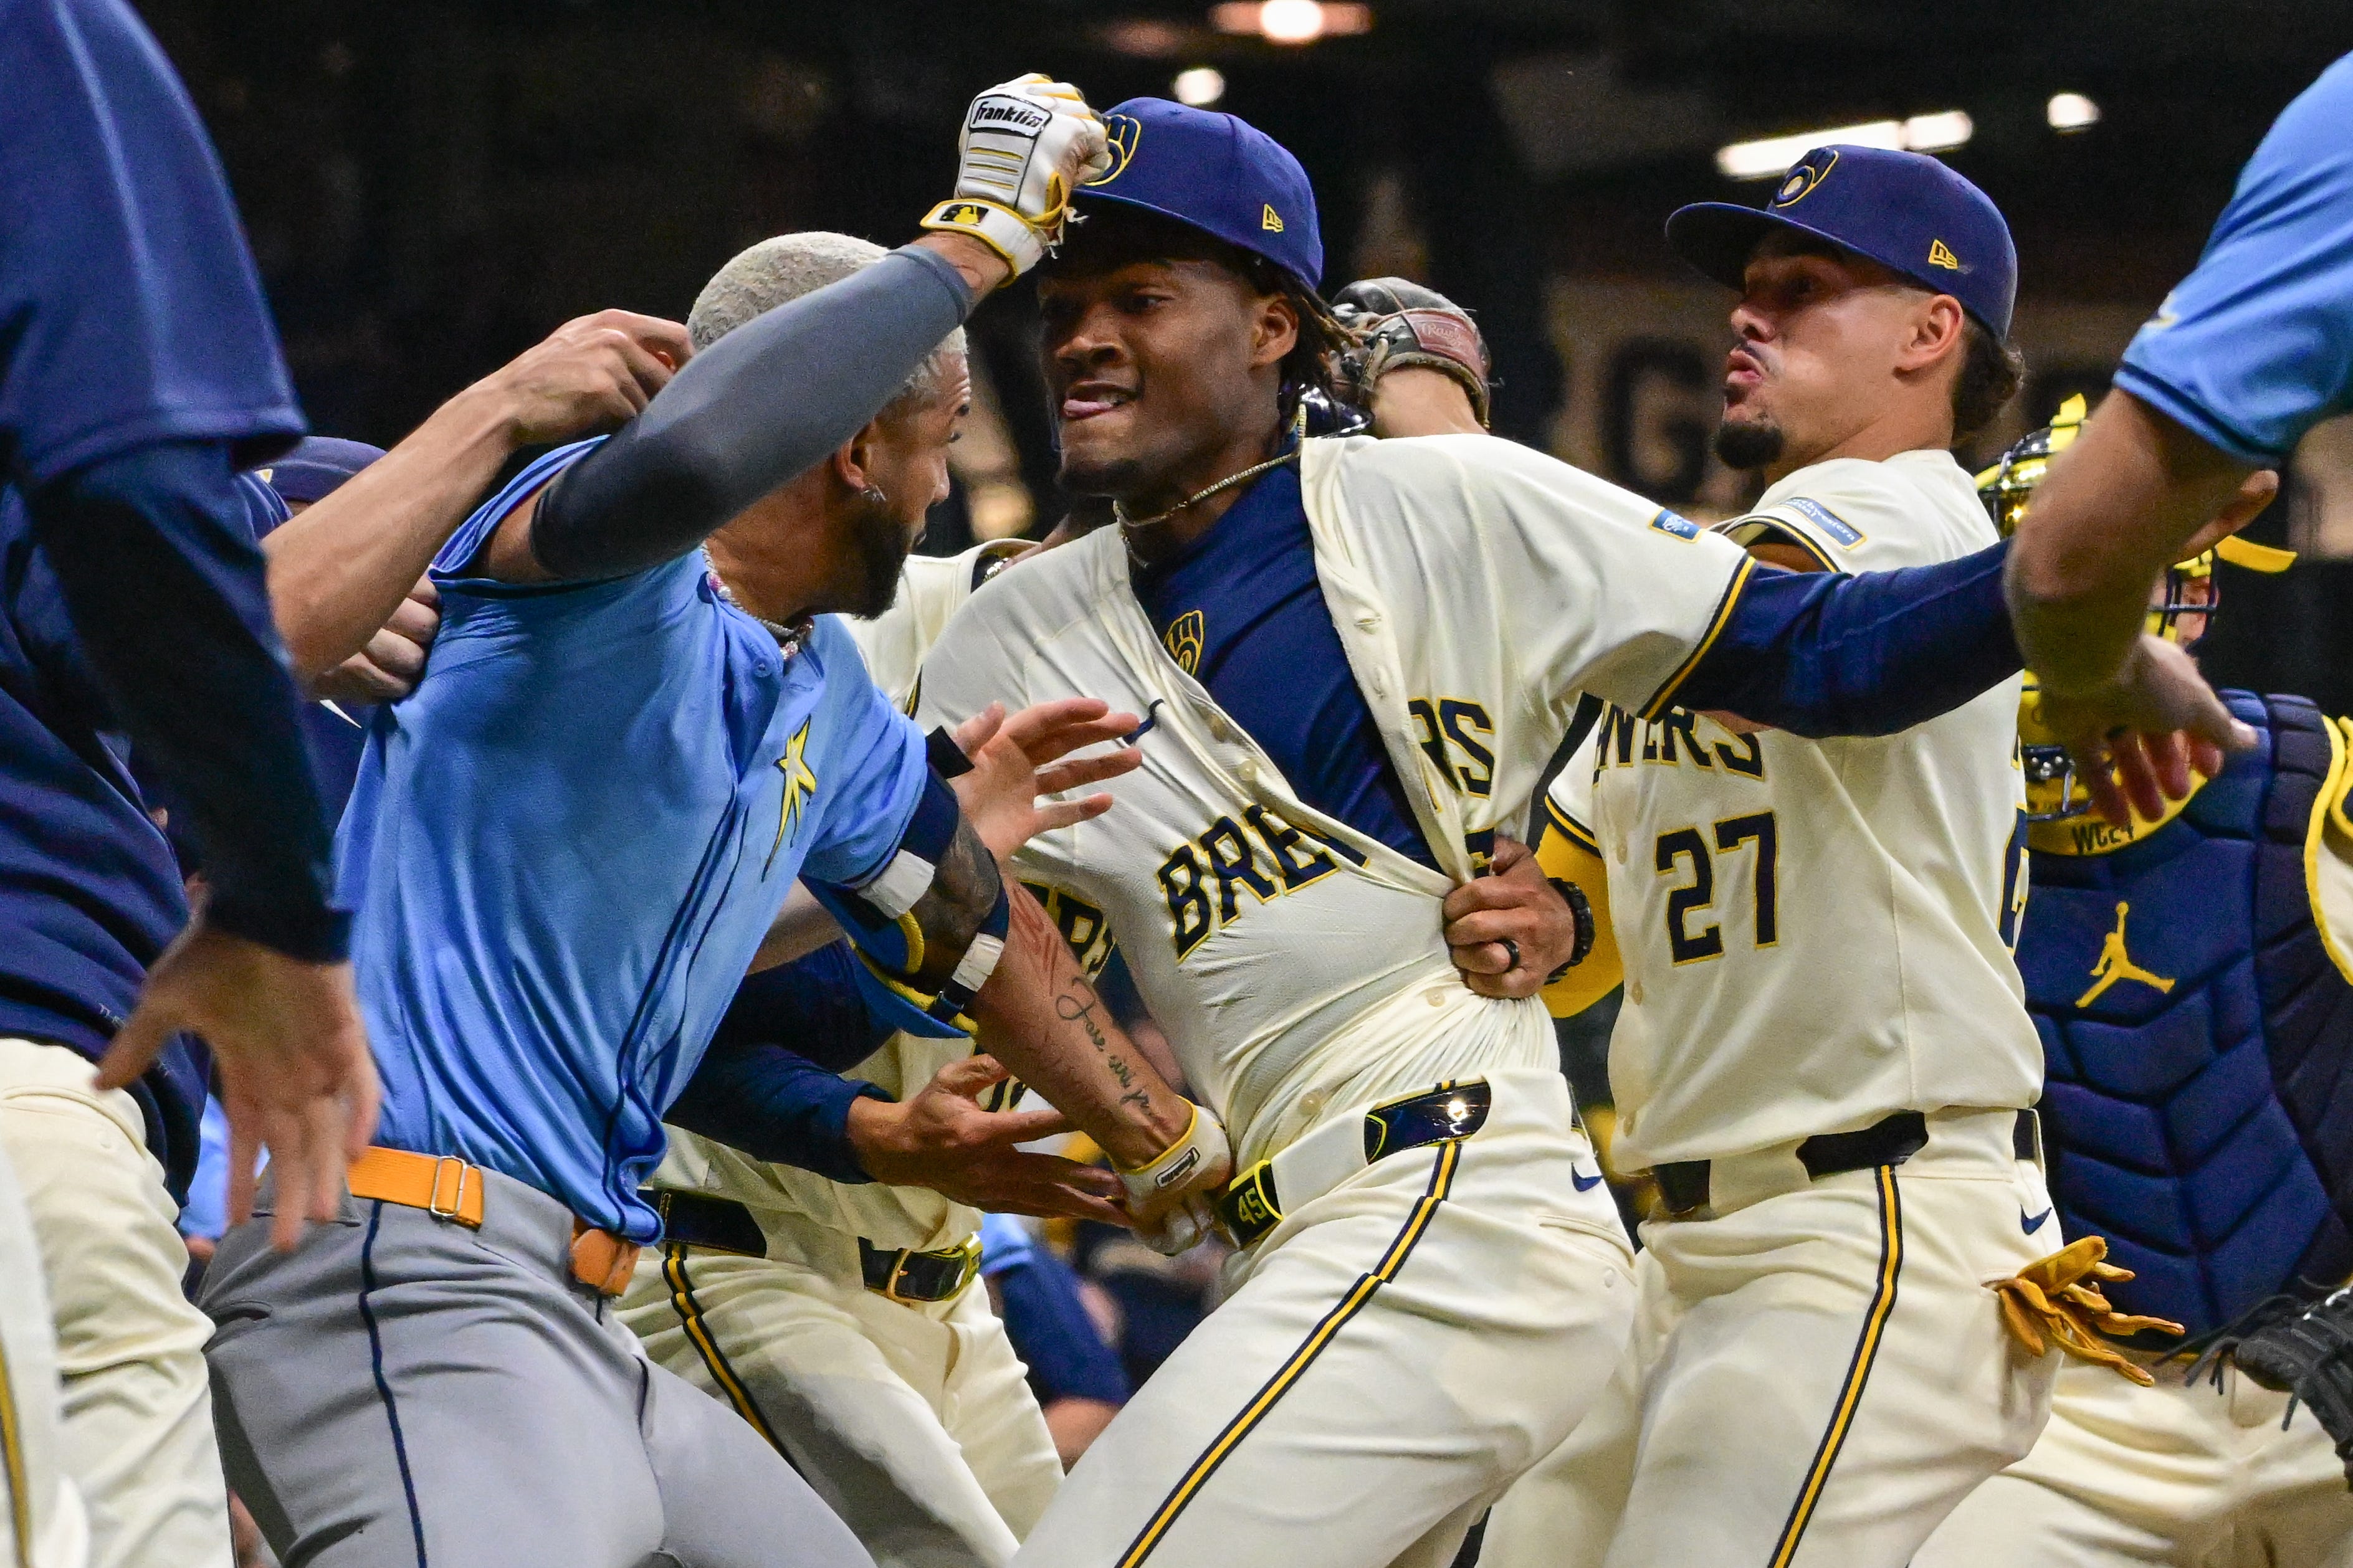 brewers, rays have benches-clearing brawl as jose siri and abner uribe throw punches